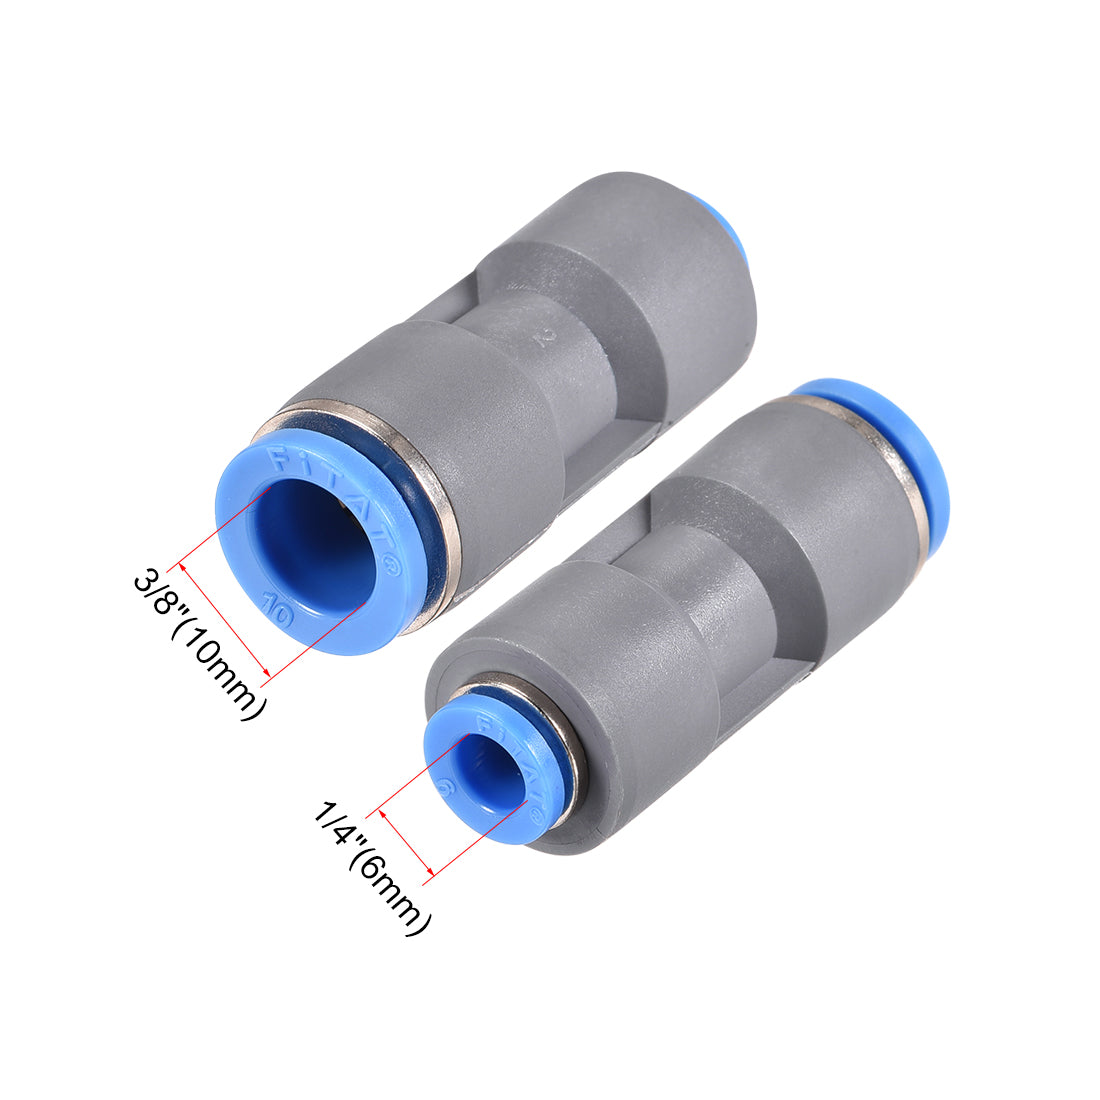 uxcell Uxcell Straight Push to Connector Reducer Fitting 10mm to 6mm Plastic Union Pipe Tube Fitting Grey 2Pcs